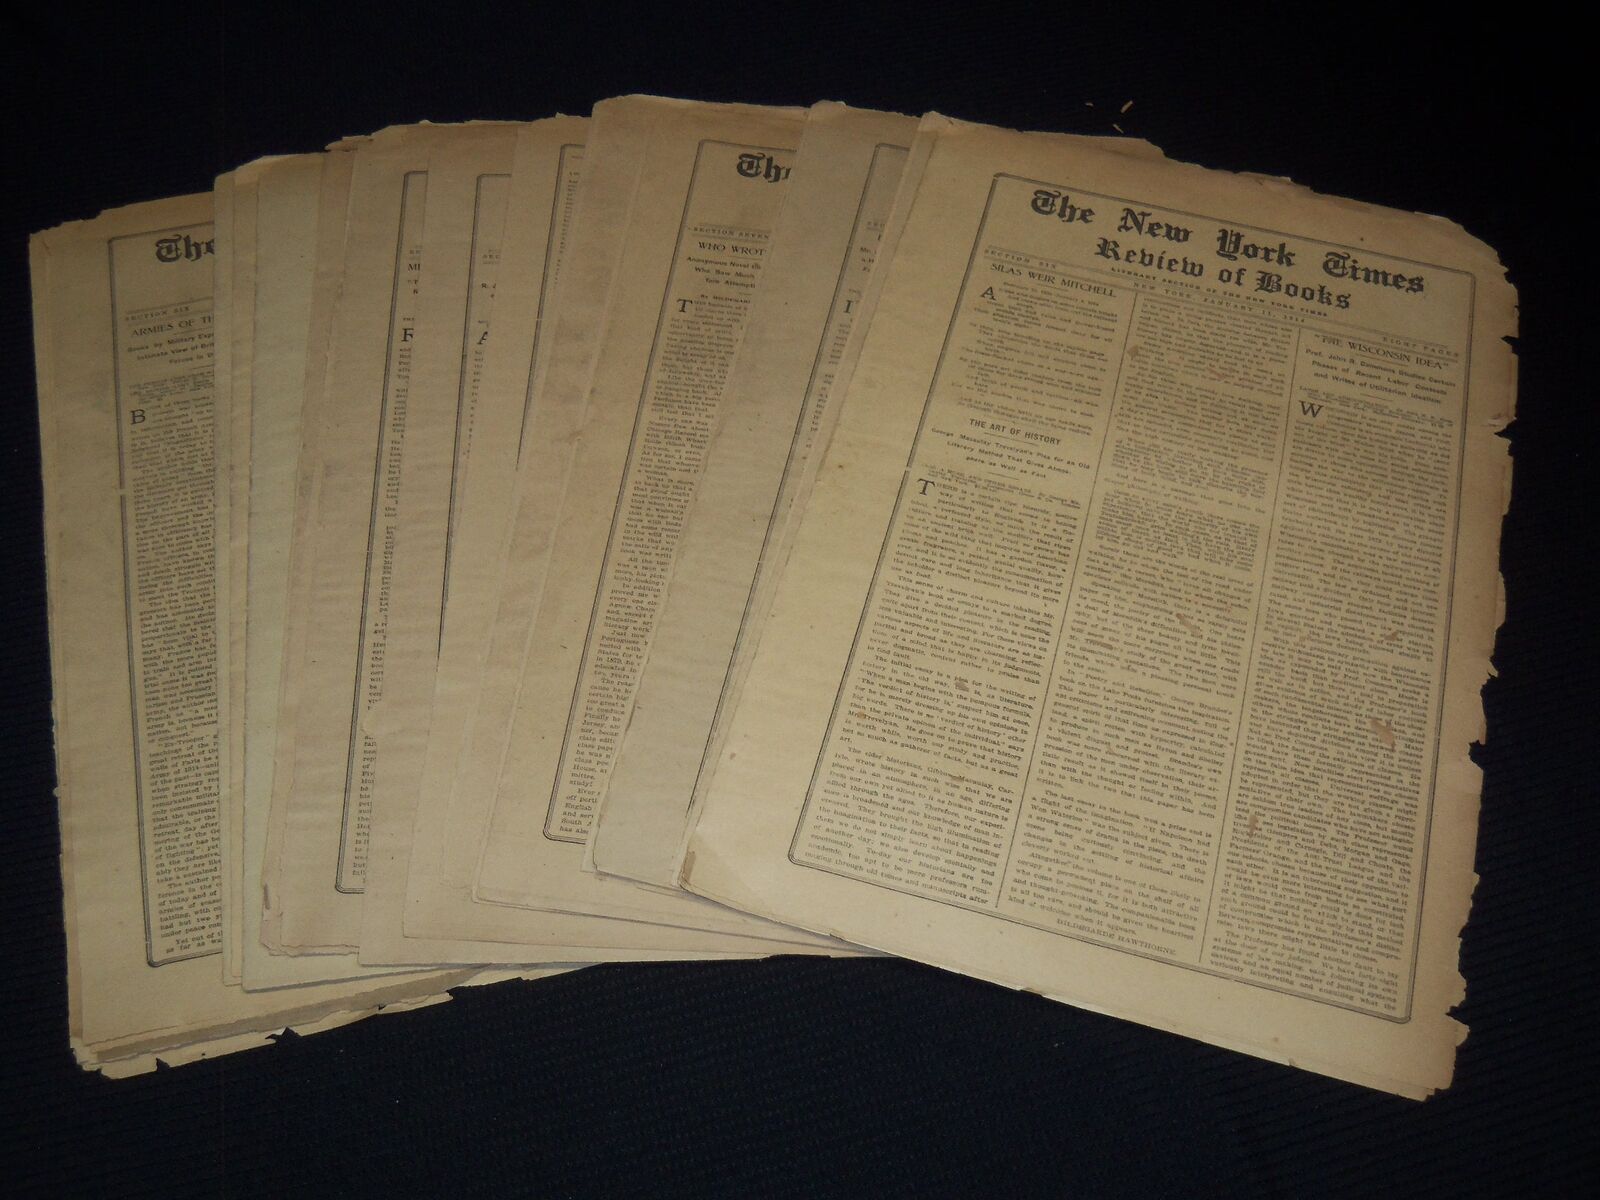 1914 NEW YORK TIMES NEWSPAPER BOOK REVIEW SECTIONS LOT OF 17 ISSUES - O 3221C